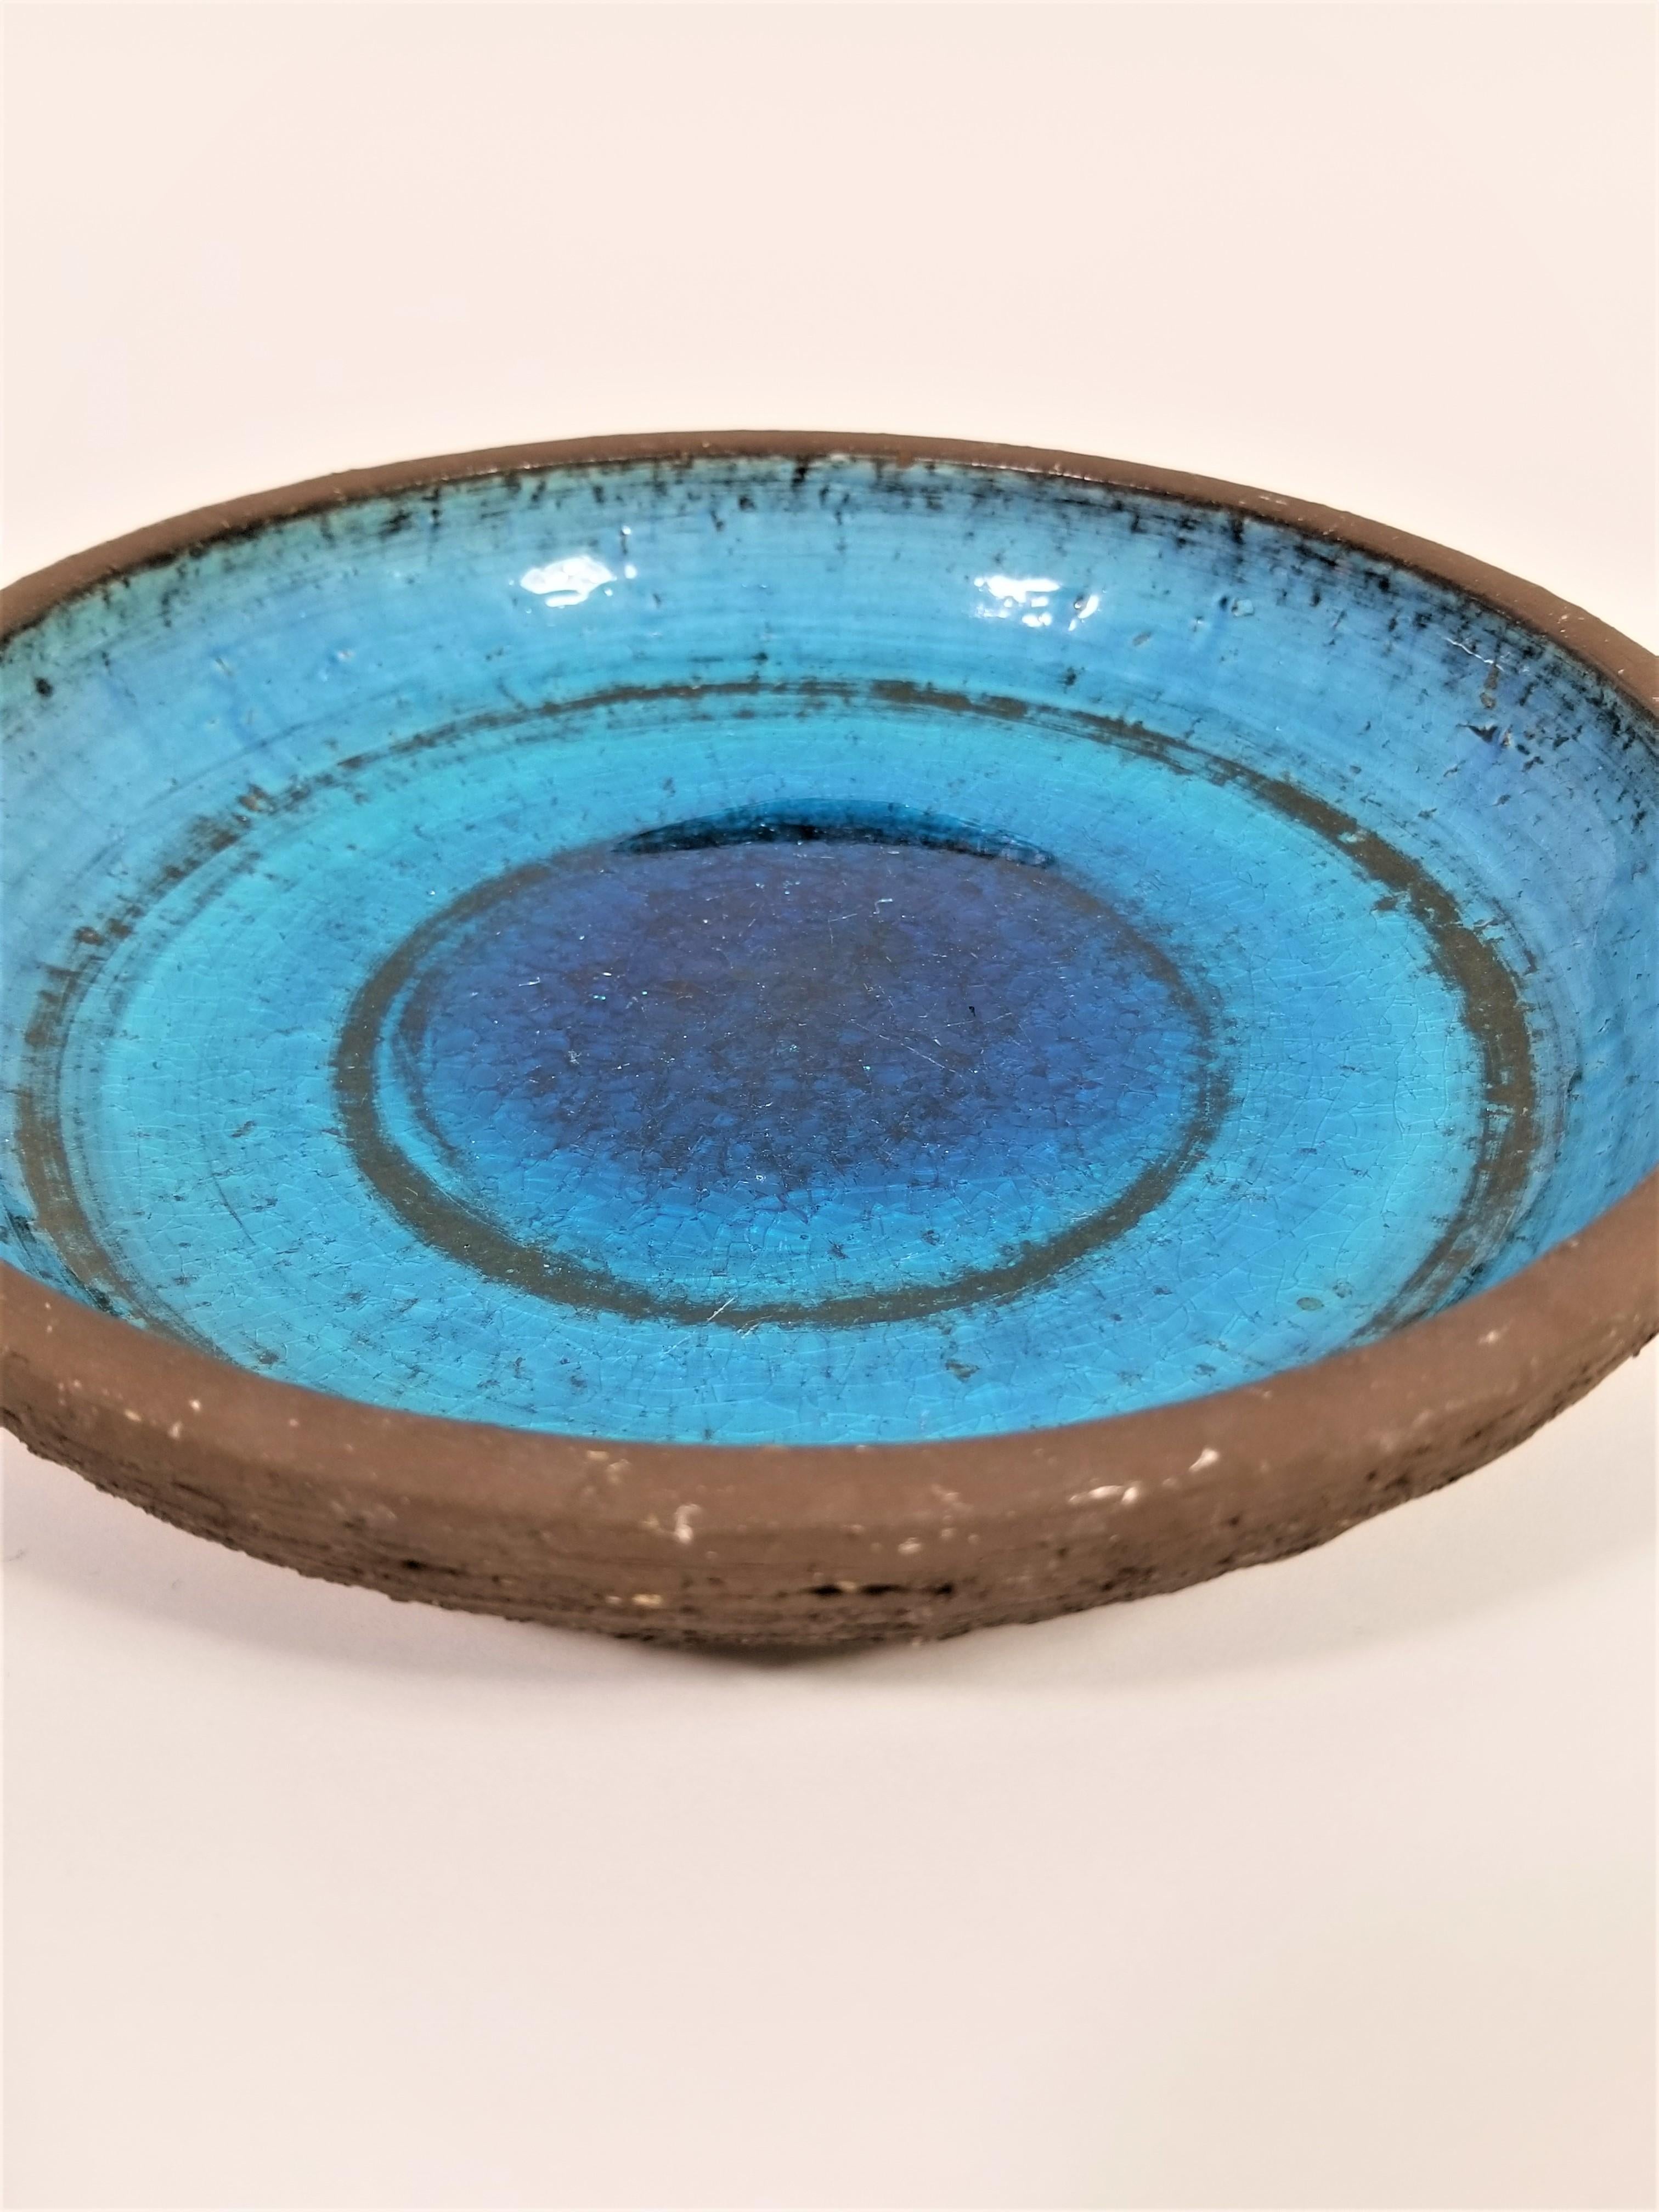 Glazed Pottery Bowl Germany Kunsthandlung W. Welker Heidelberg In Excellent Condition For Sale In New York, NY